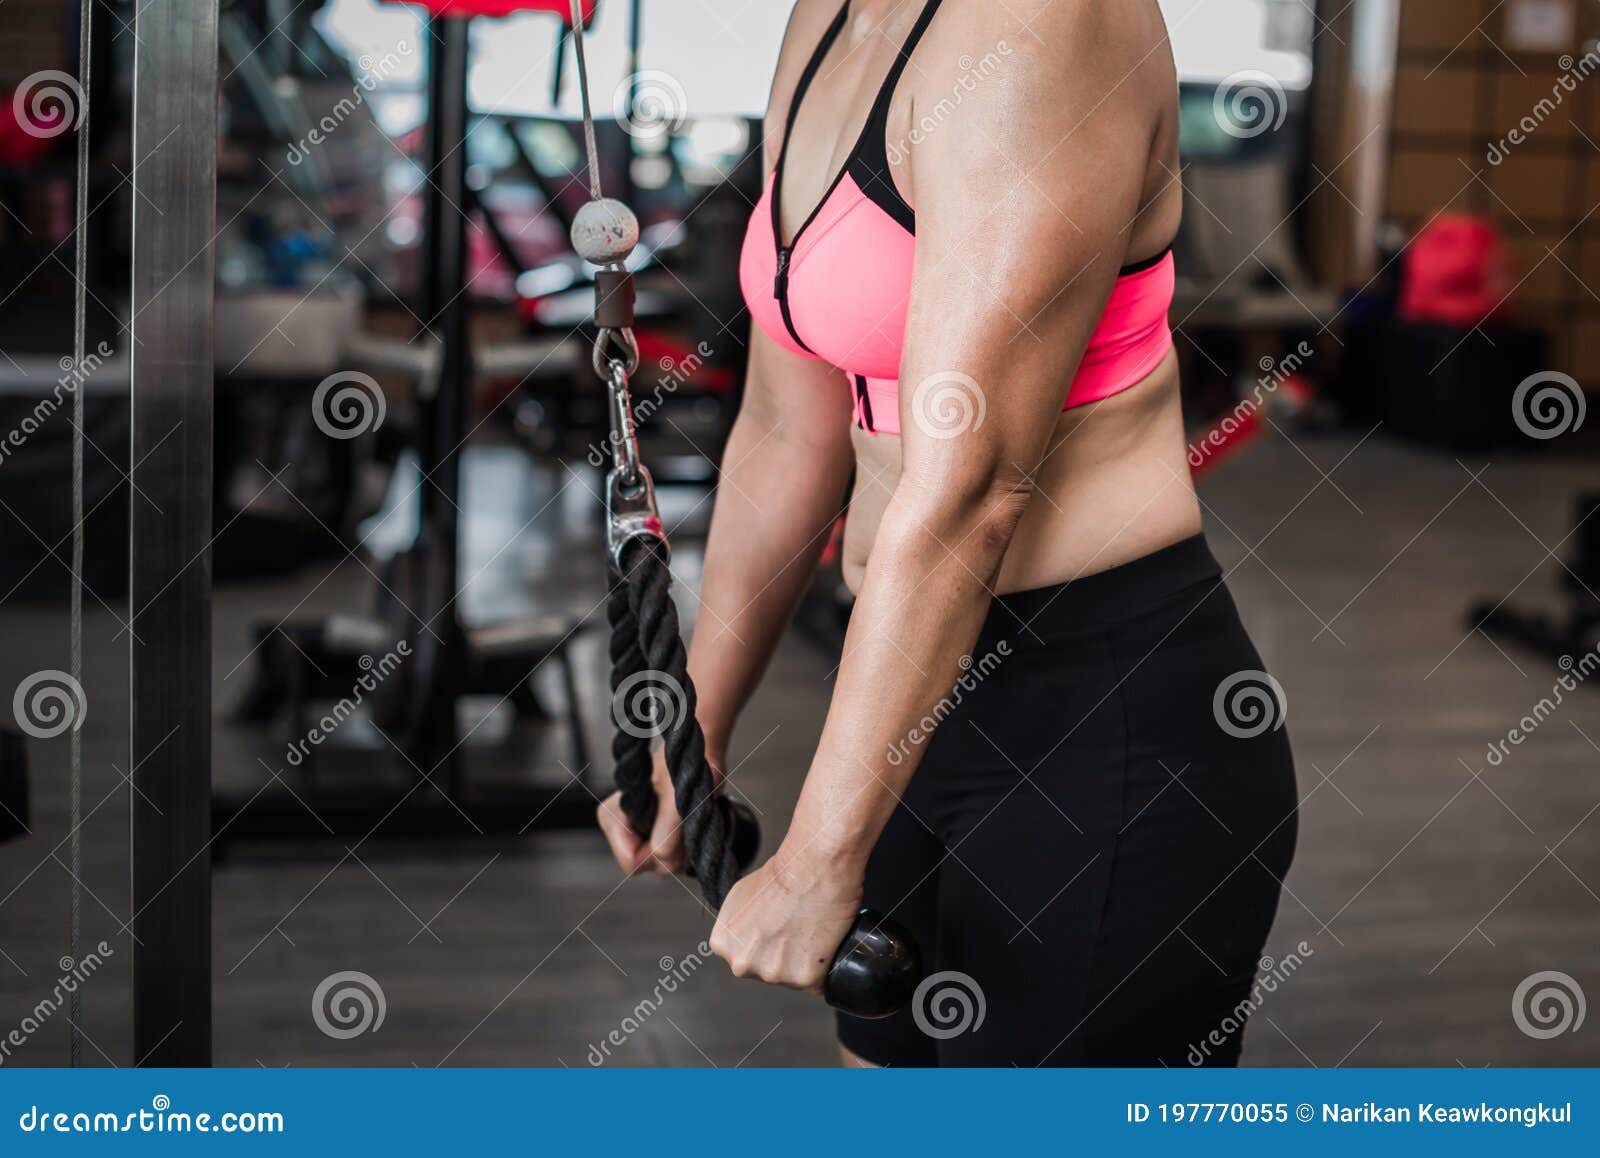 female adults doing pull ups on bar in cross fit training gym